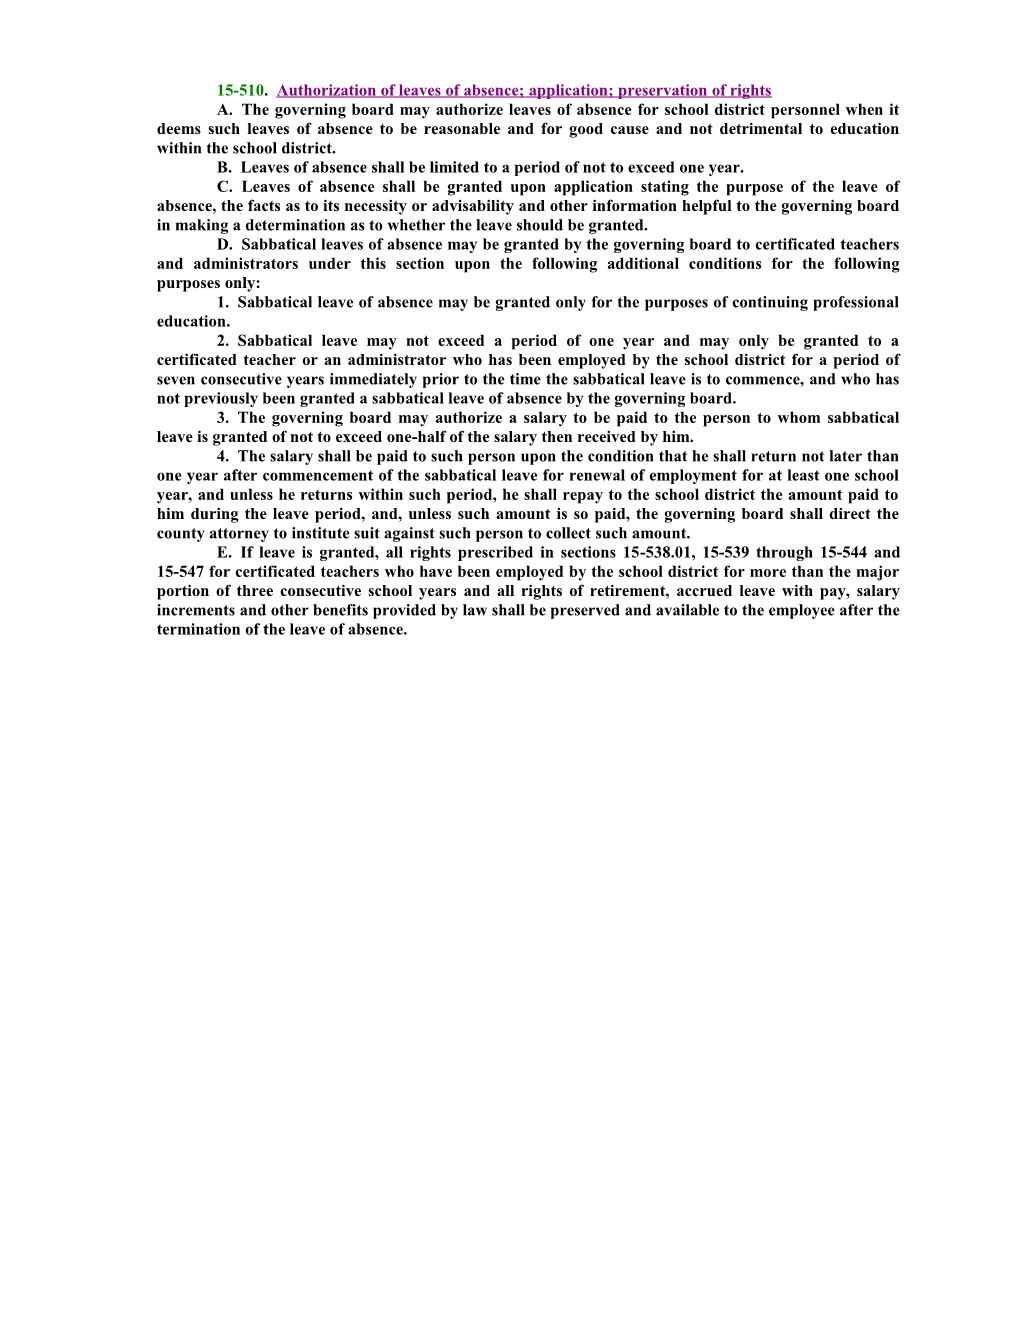 START STATUTE15-510.Authorization of Leaves of Absence; Application; Preservation of Rights